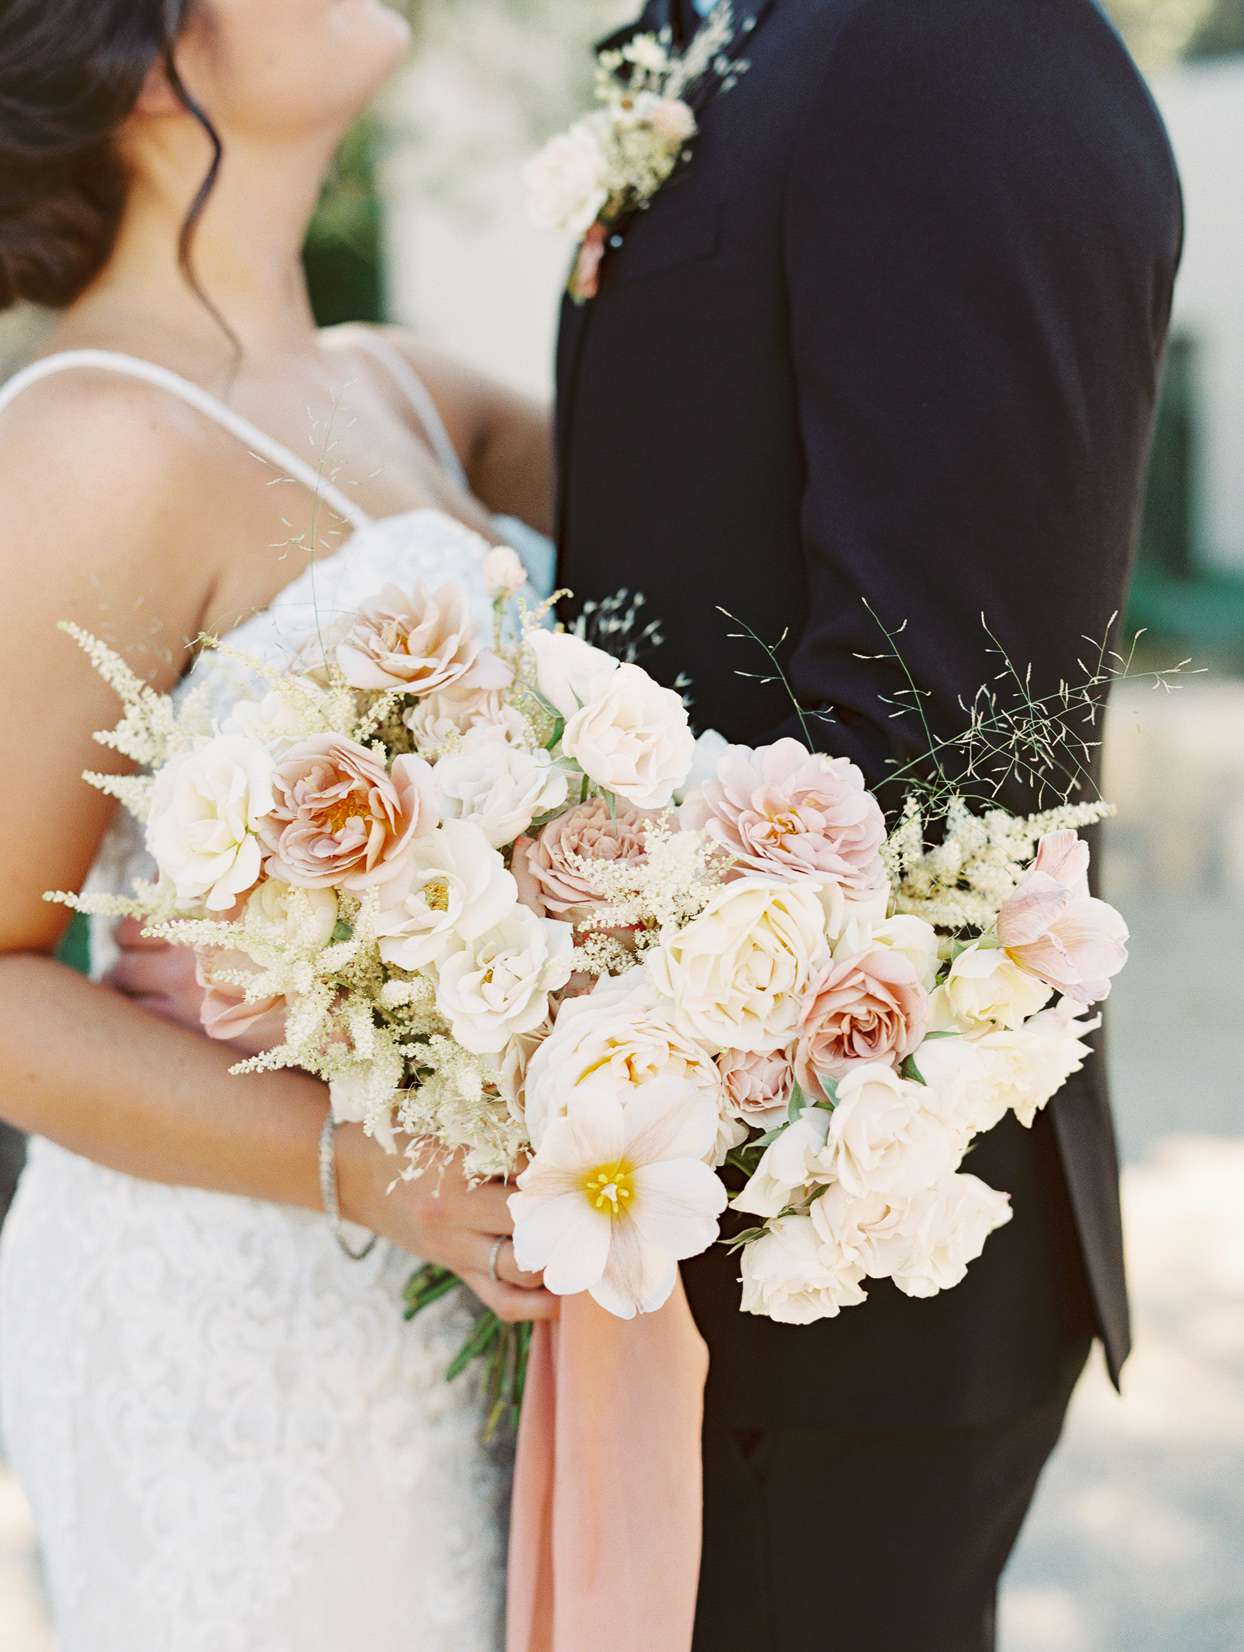 Bride holding a bouquet with Italian pit, explosion grass, garden spray roses, spray roses, garden roses, tulips, carnations, astilbe, and preserved florals